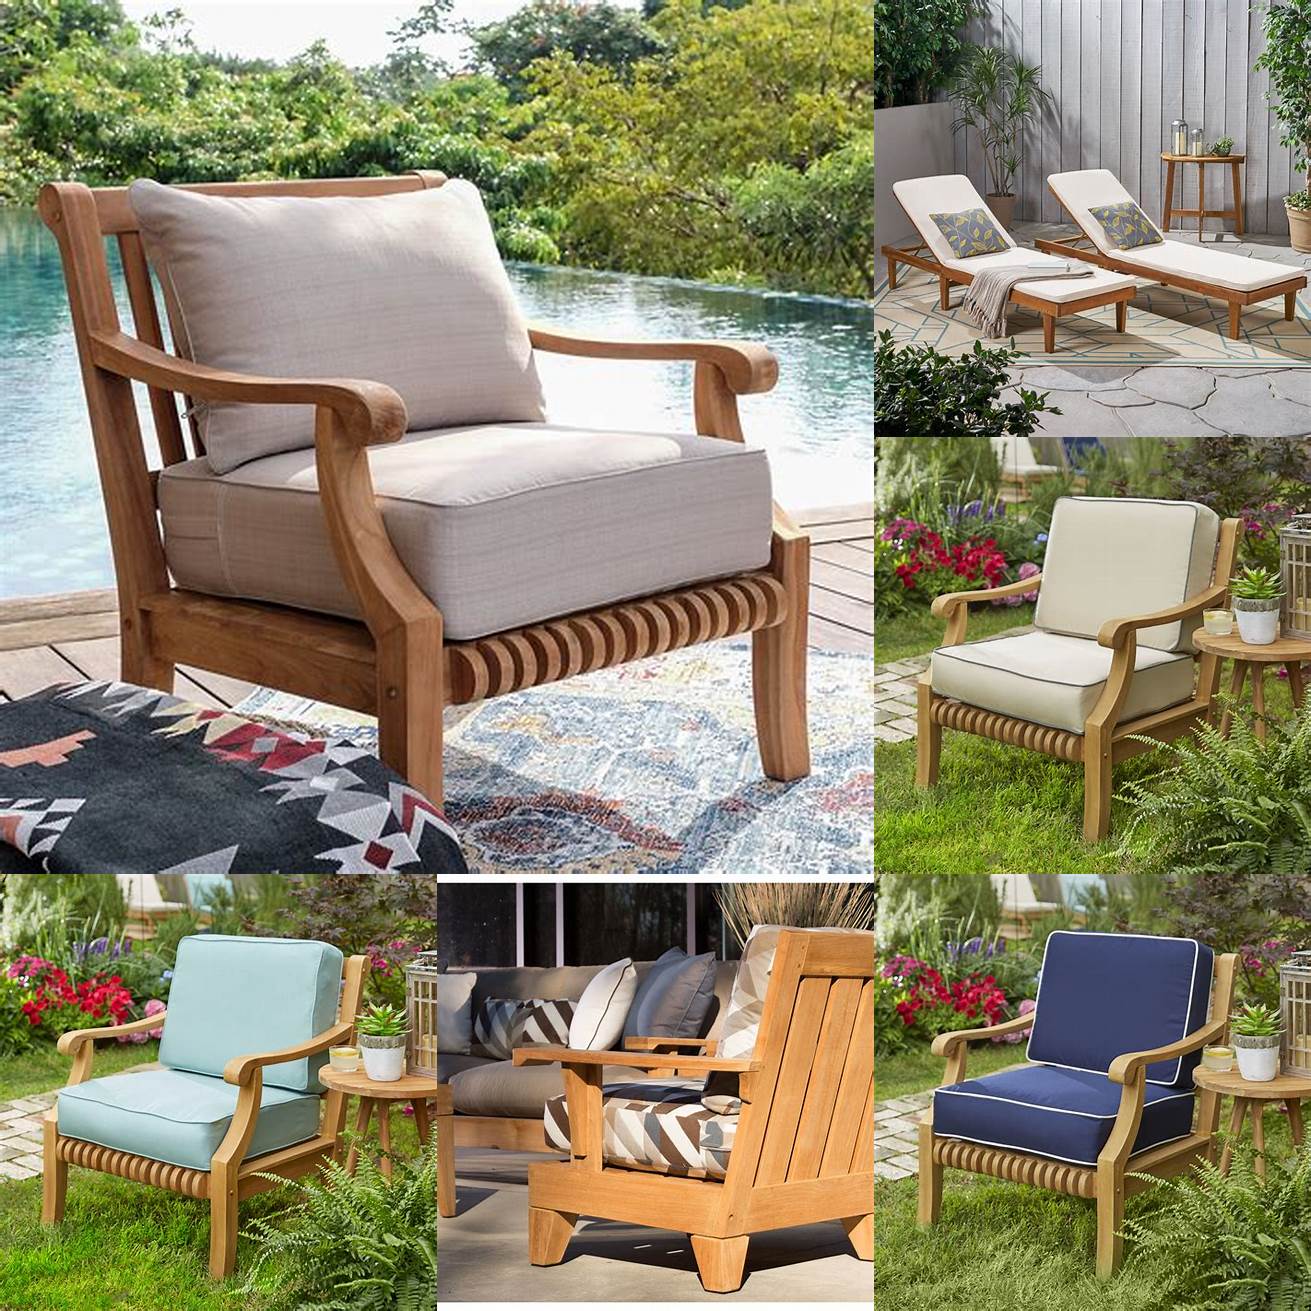 Teak lounge chairs with cushions